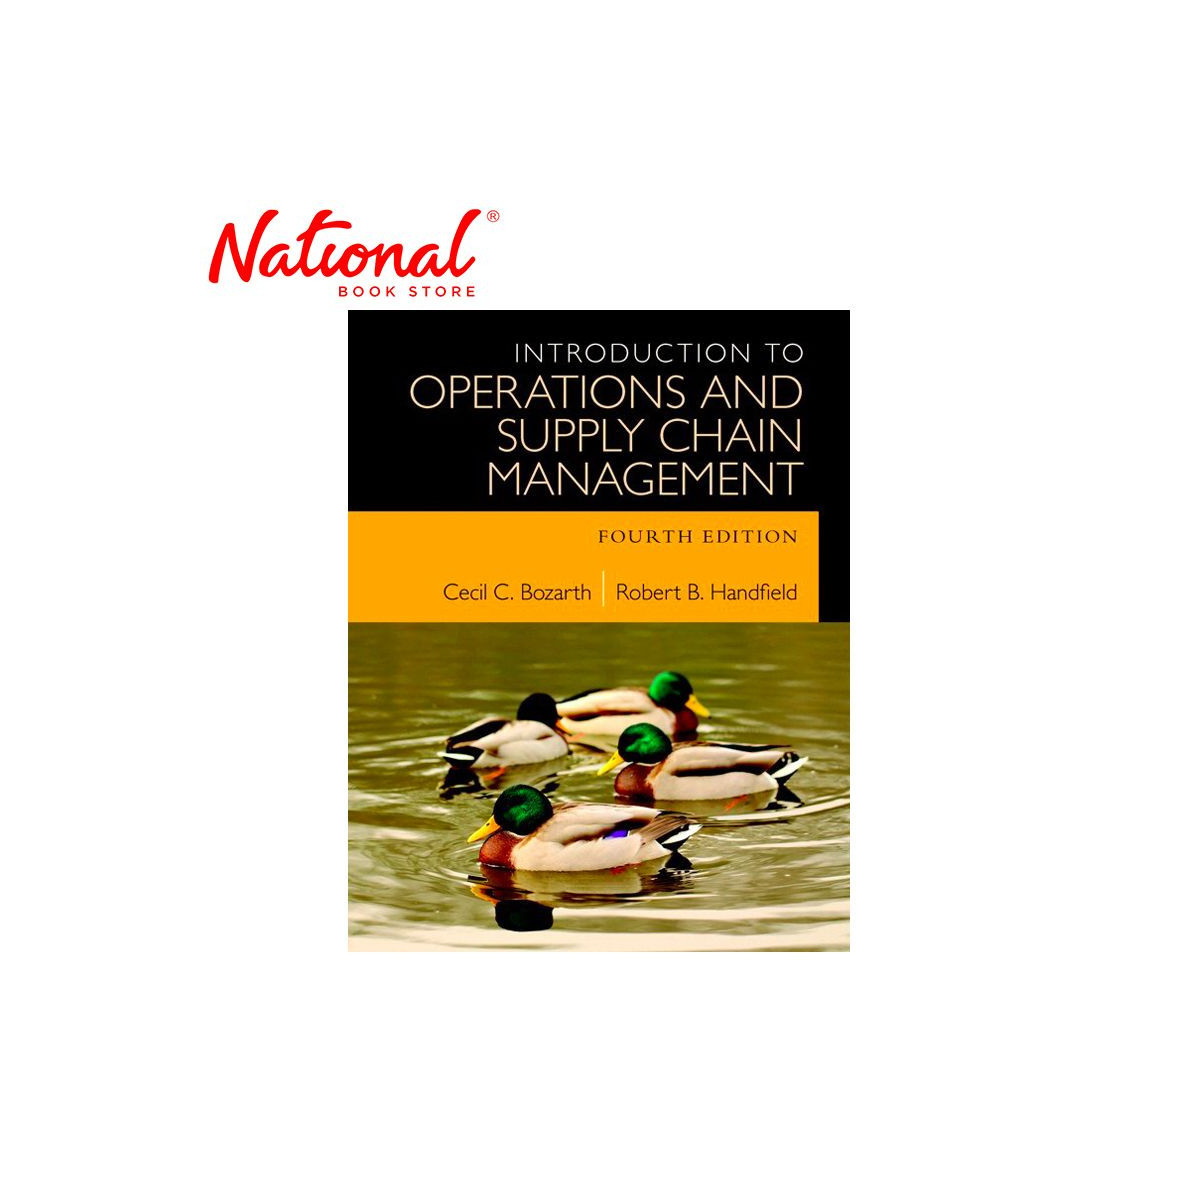 Introduction to Operations and Supply Chain Management Fourth Edition by Cecil B. Bozarth - College